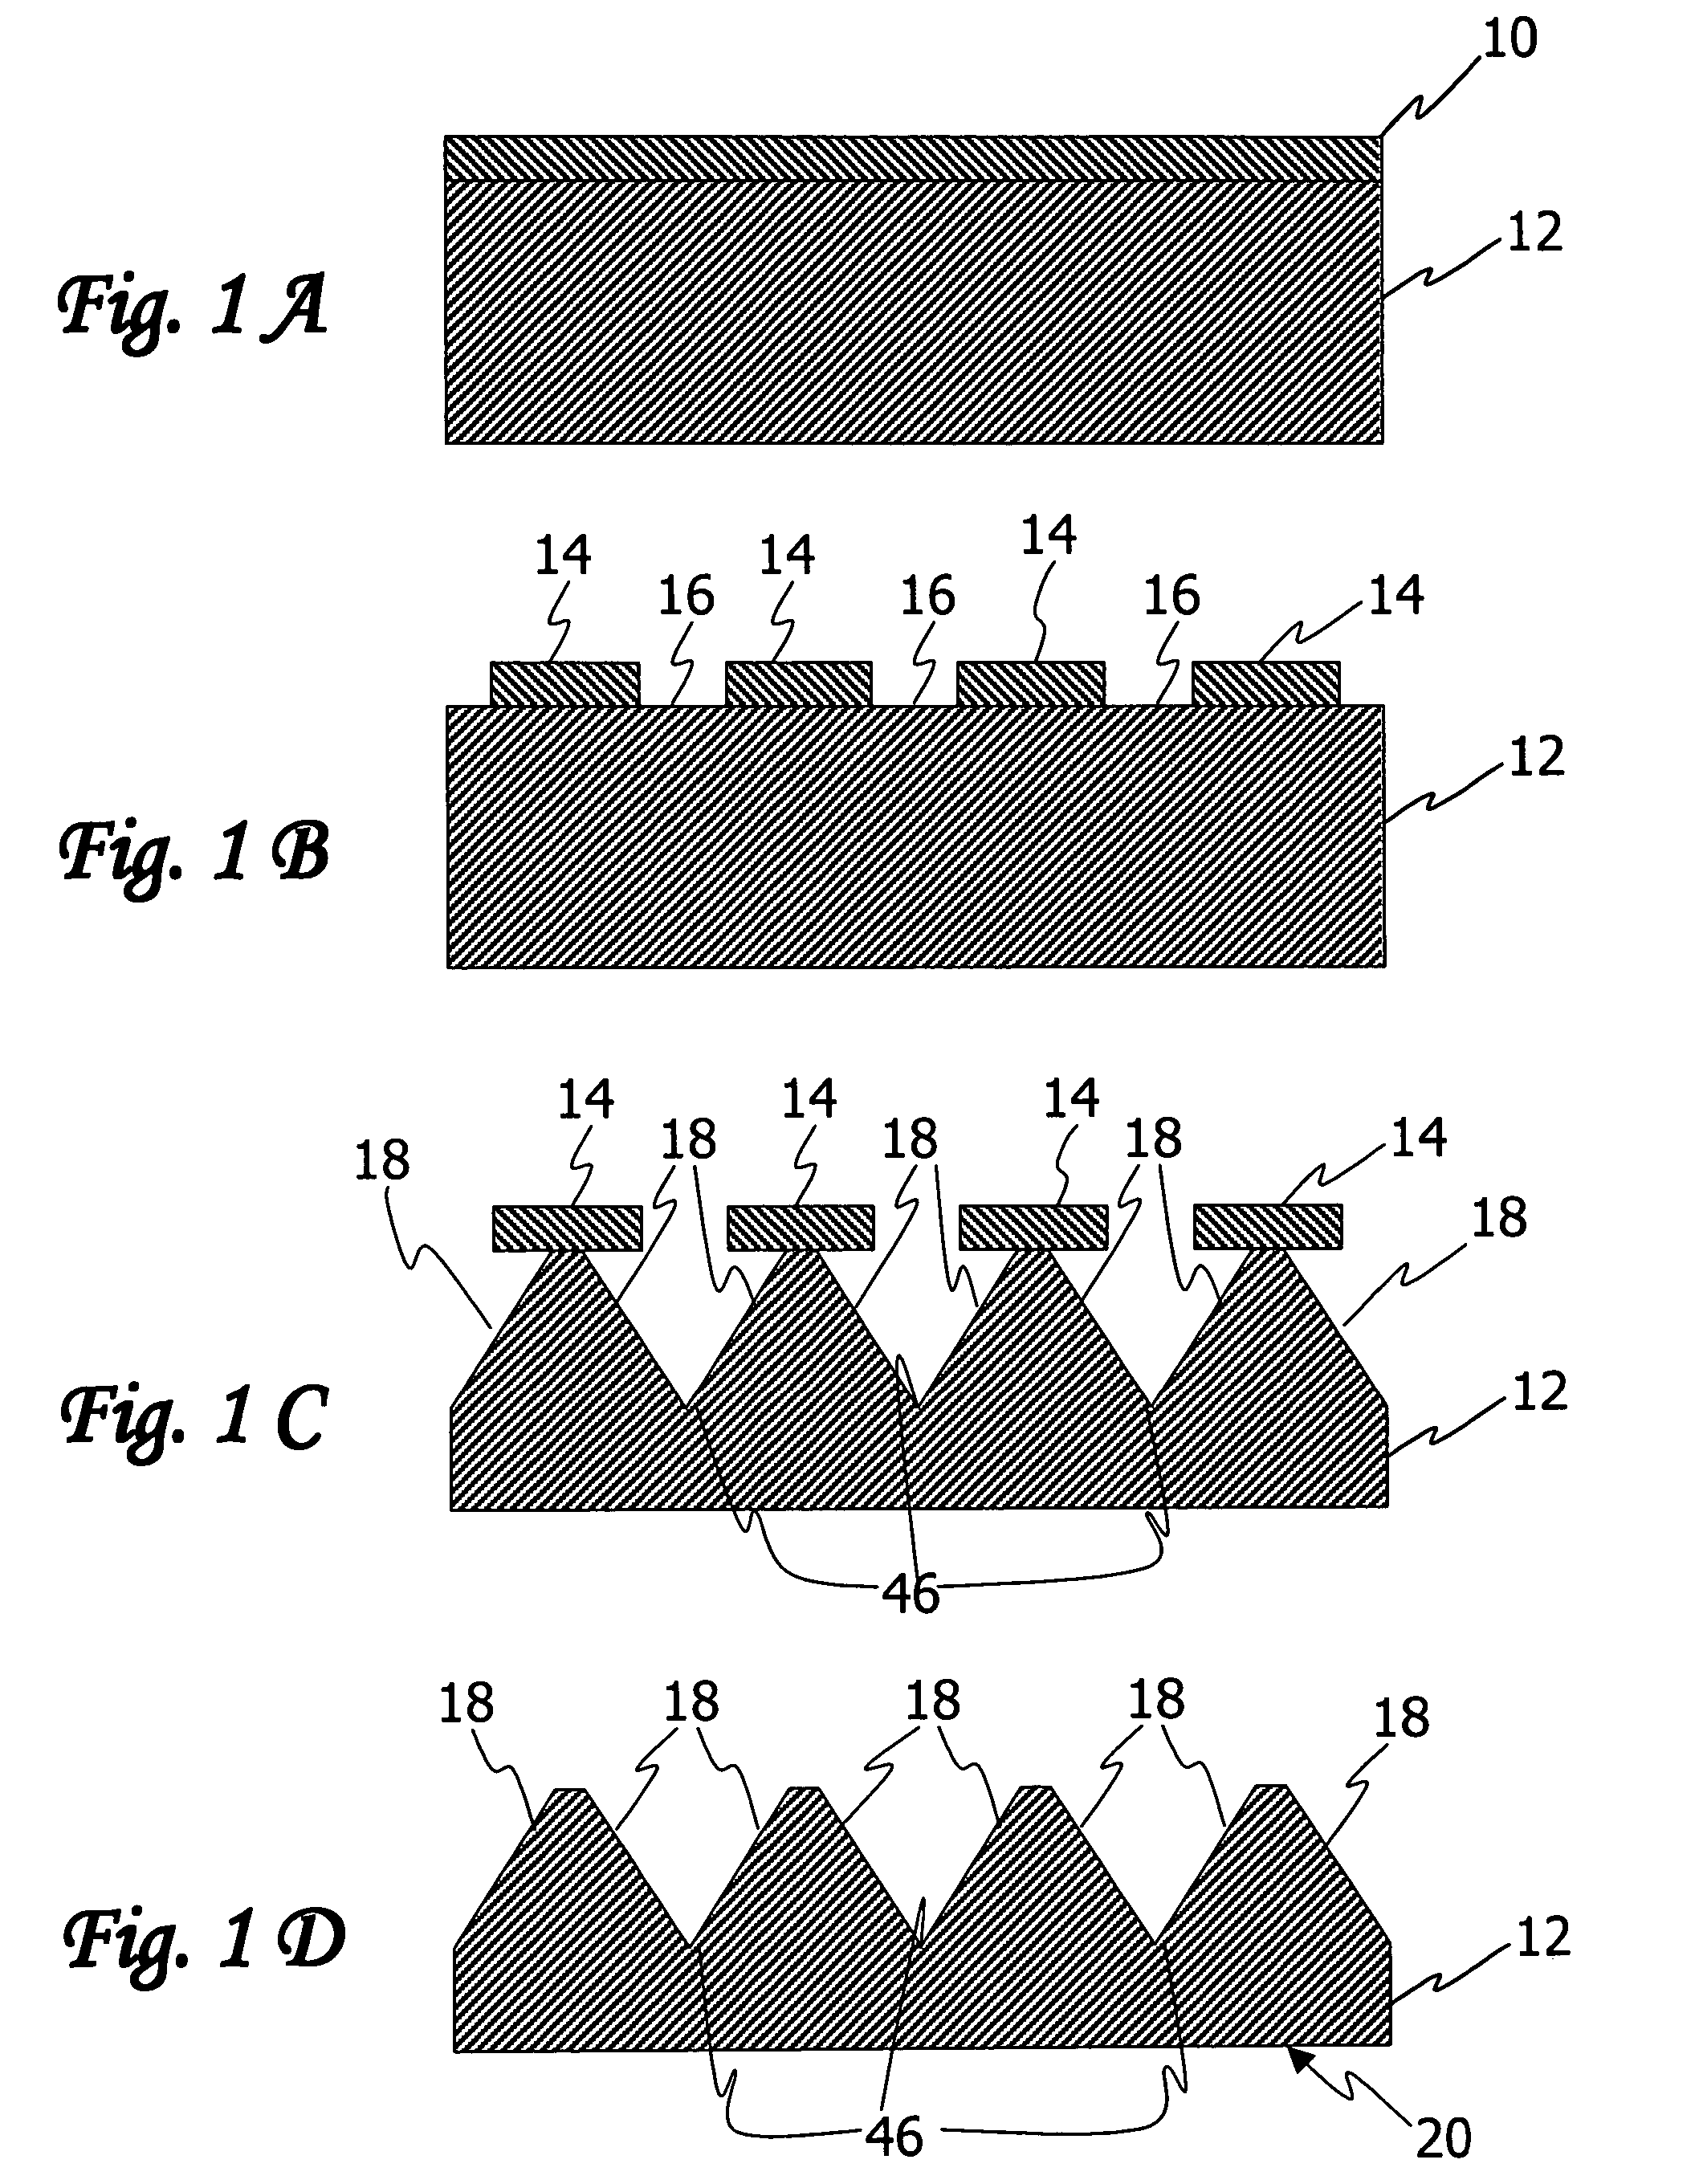 Method of making an article comprising nanoscale patterns with reduced edge roughness